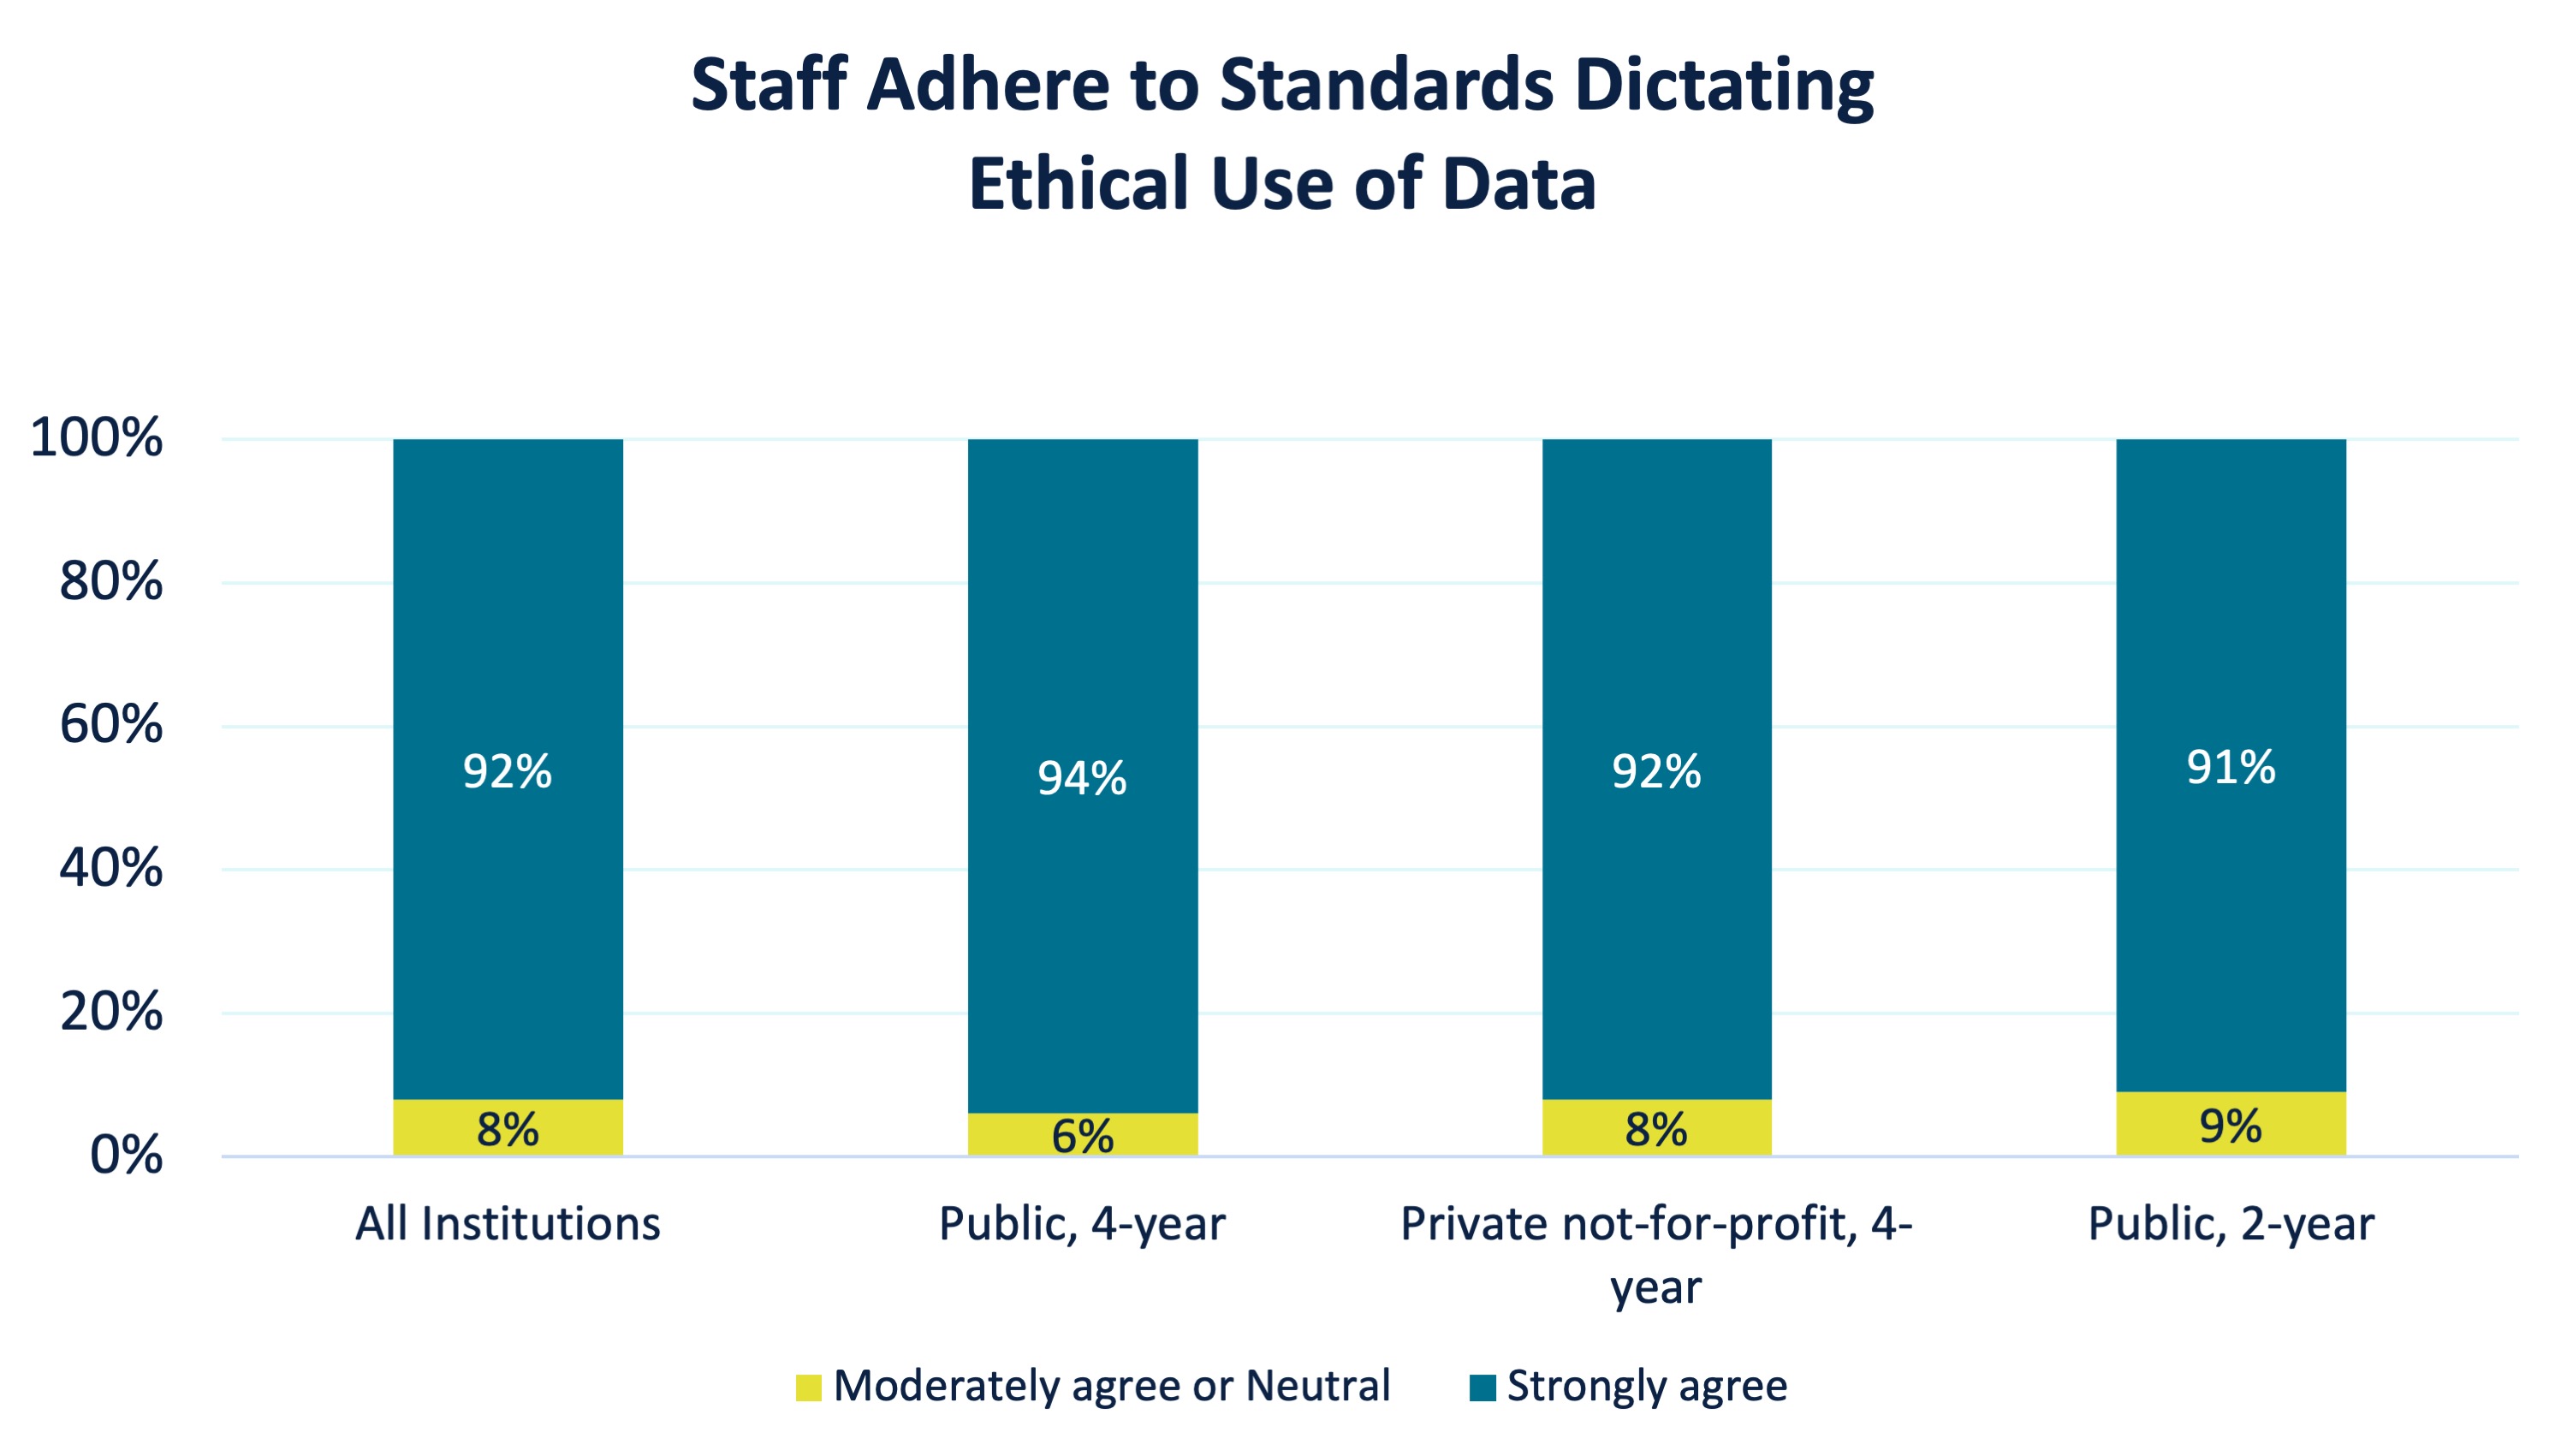 Do Staff Adhere to Standards Dictating Ethical Use of Data?